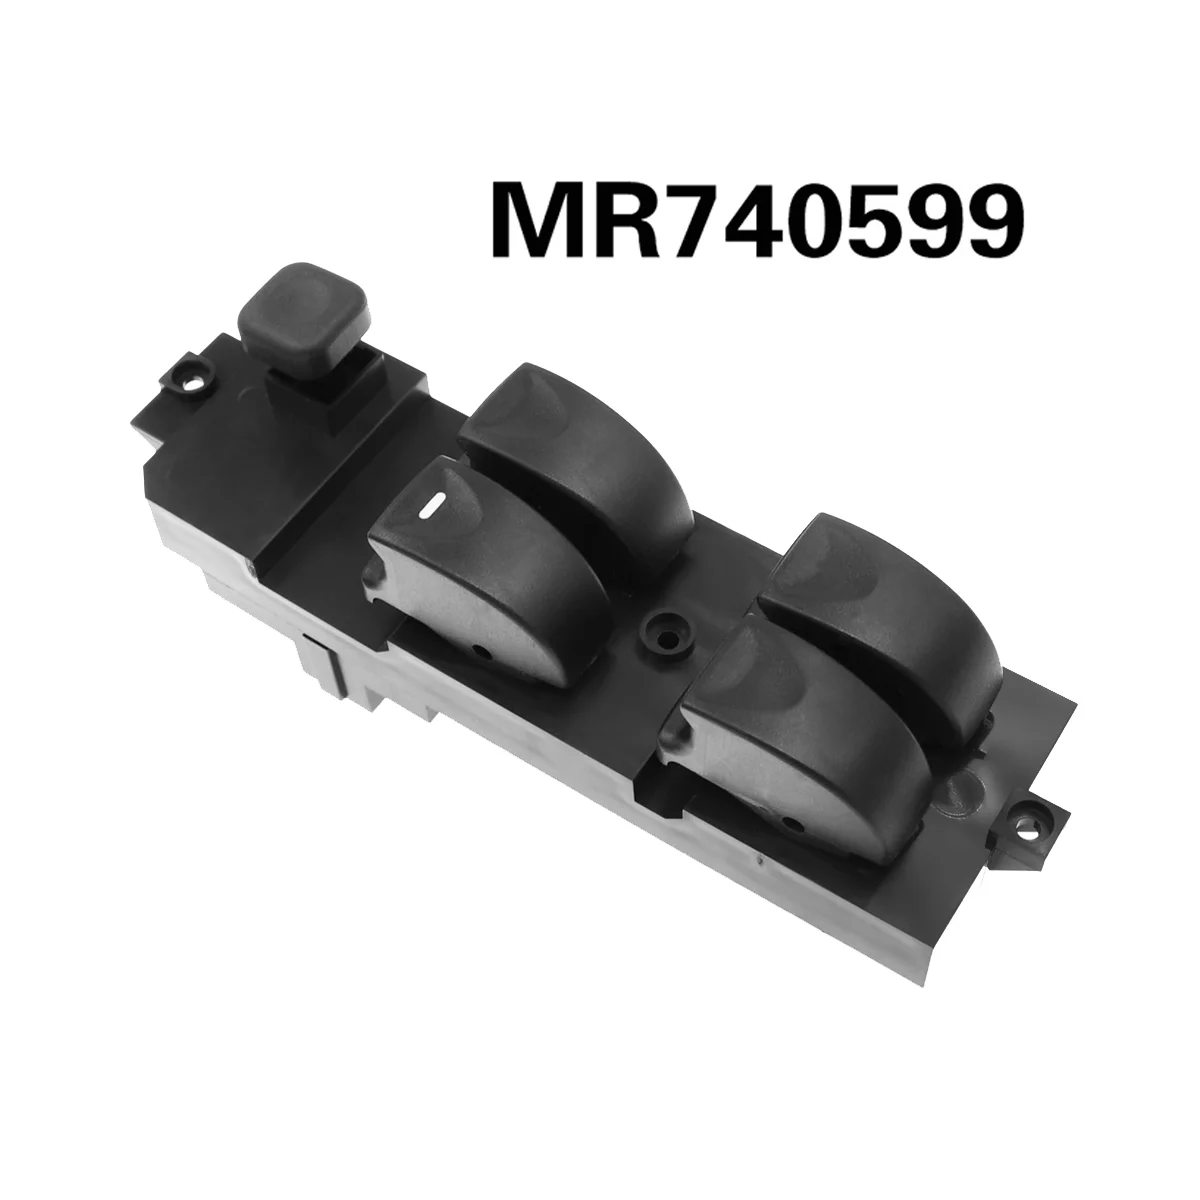 

LHD MR740599 Power Window Switch Fit for Mitsubishi Carisma Space Star MR792845 Car Front Left Hand Driver Side